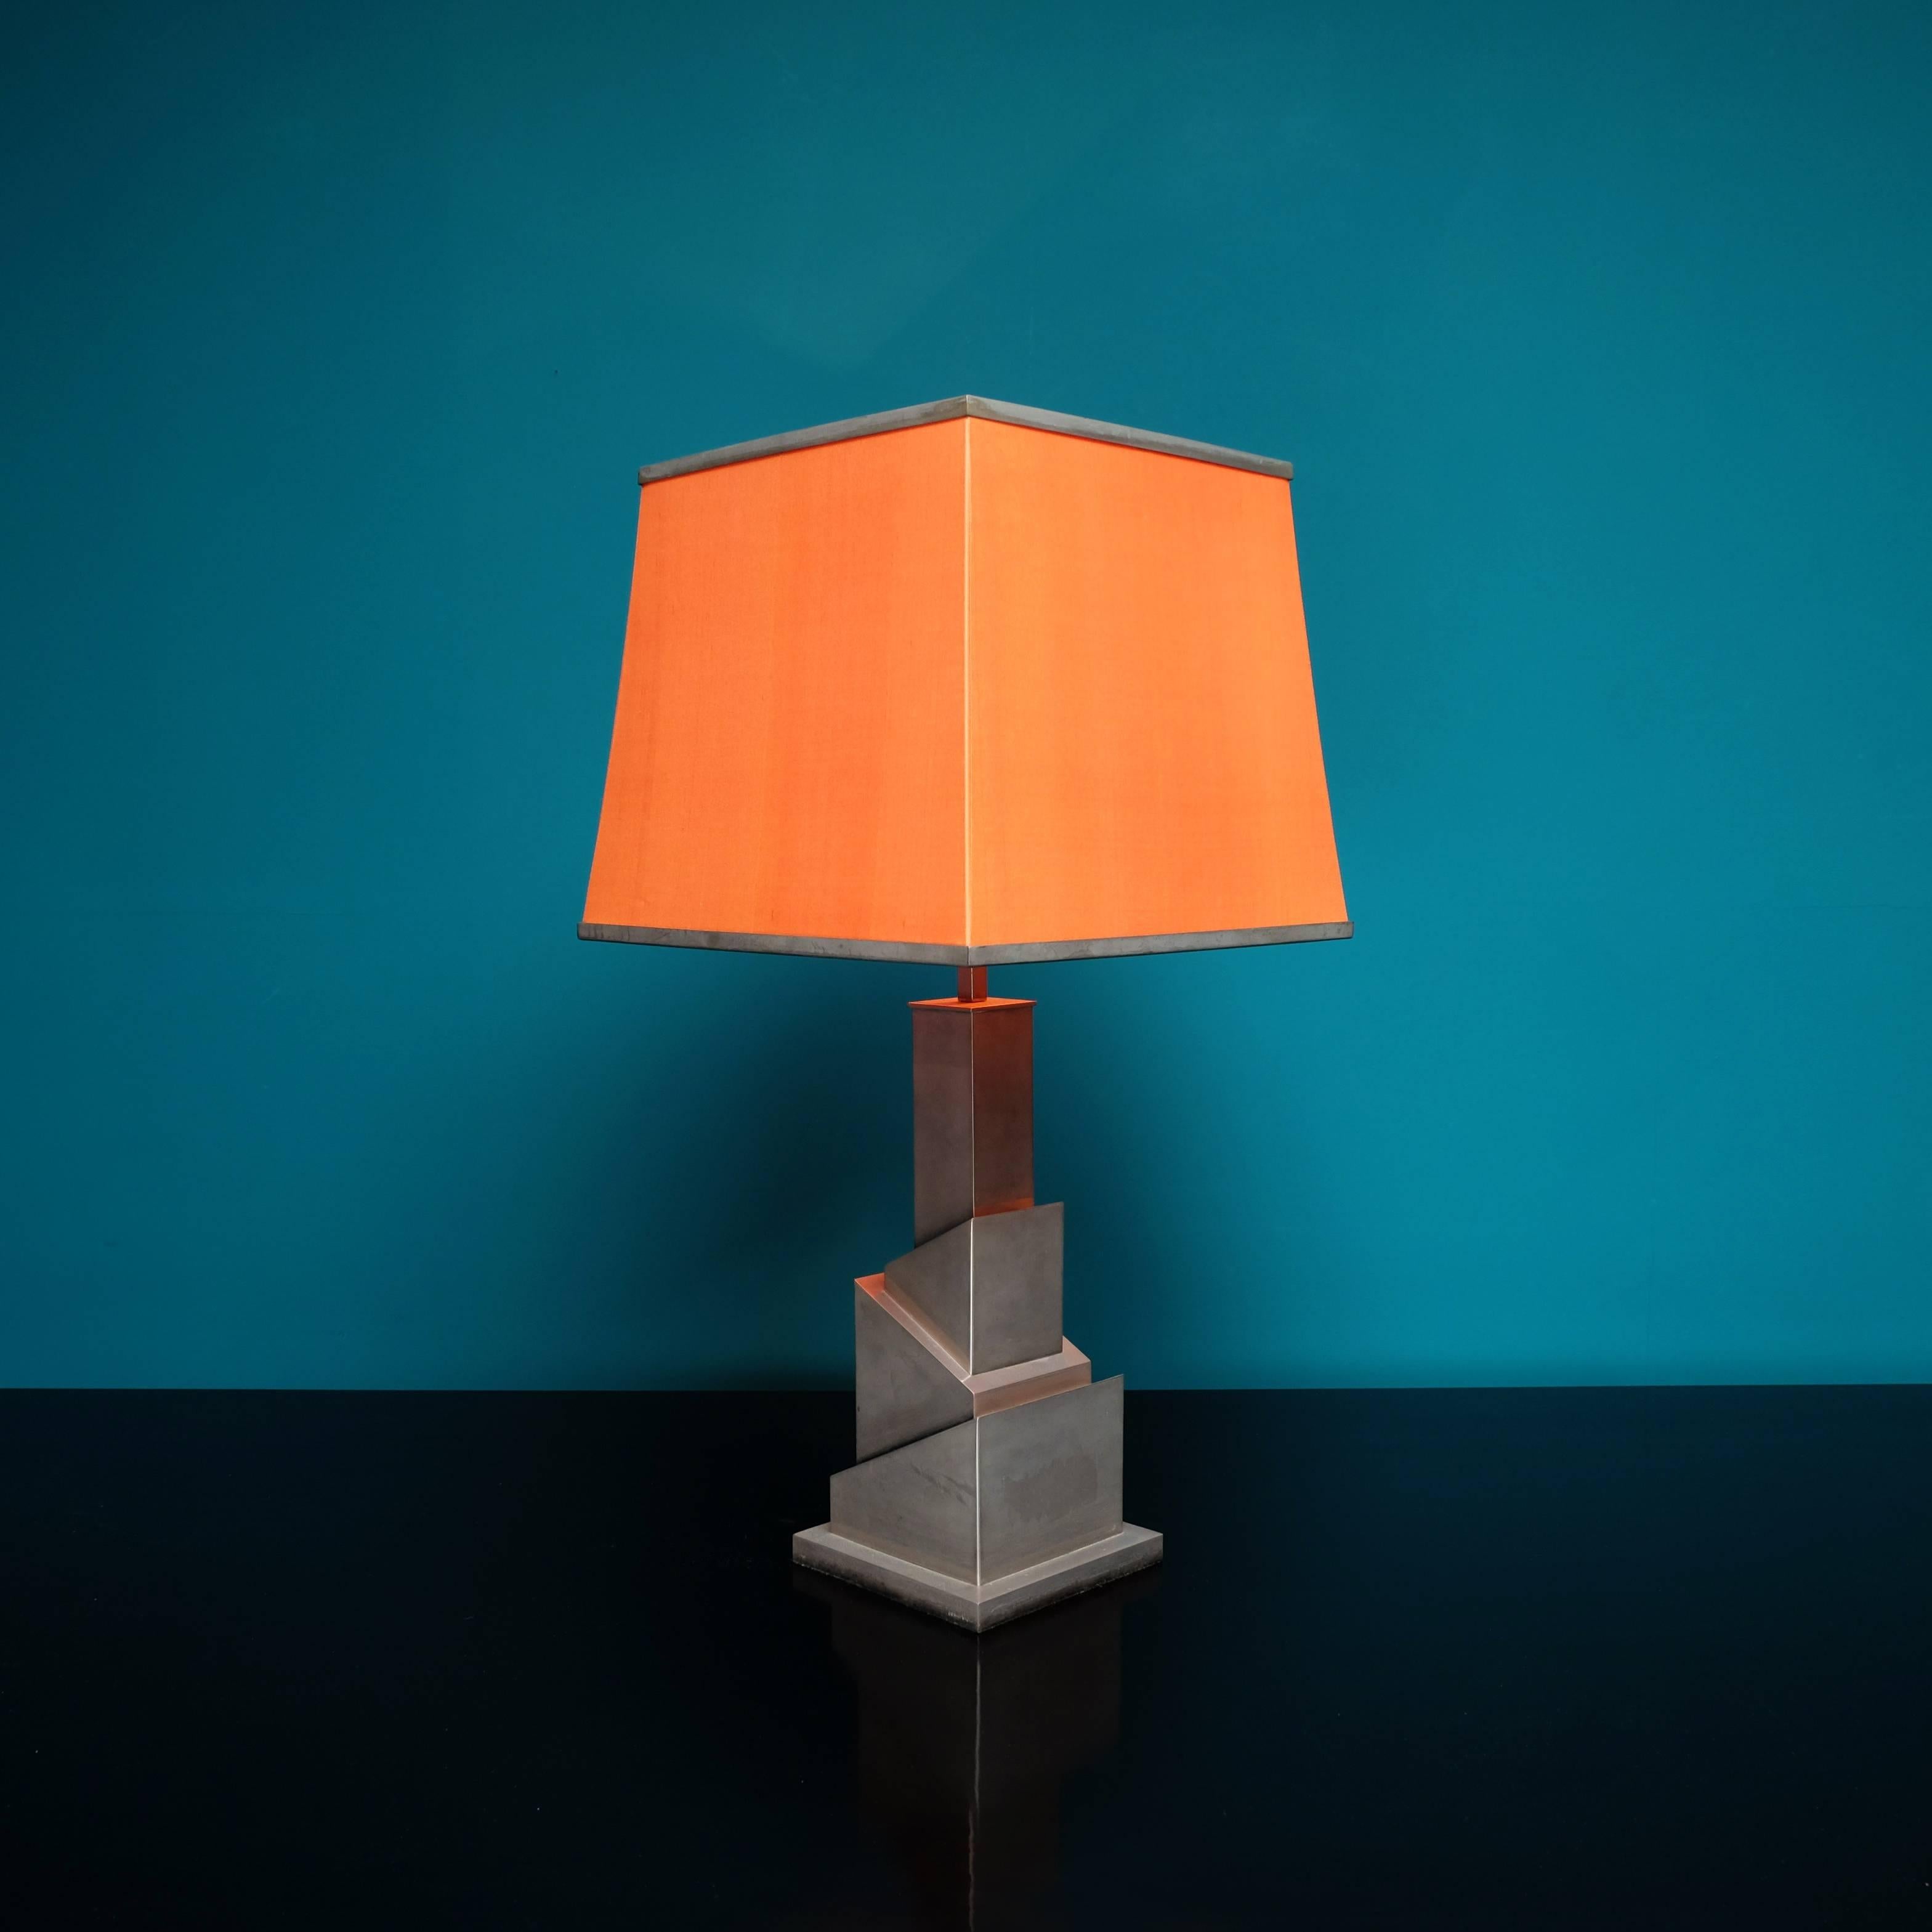 Sculptural nickel-plated table lamp in original condition with orange silk shade.